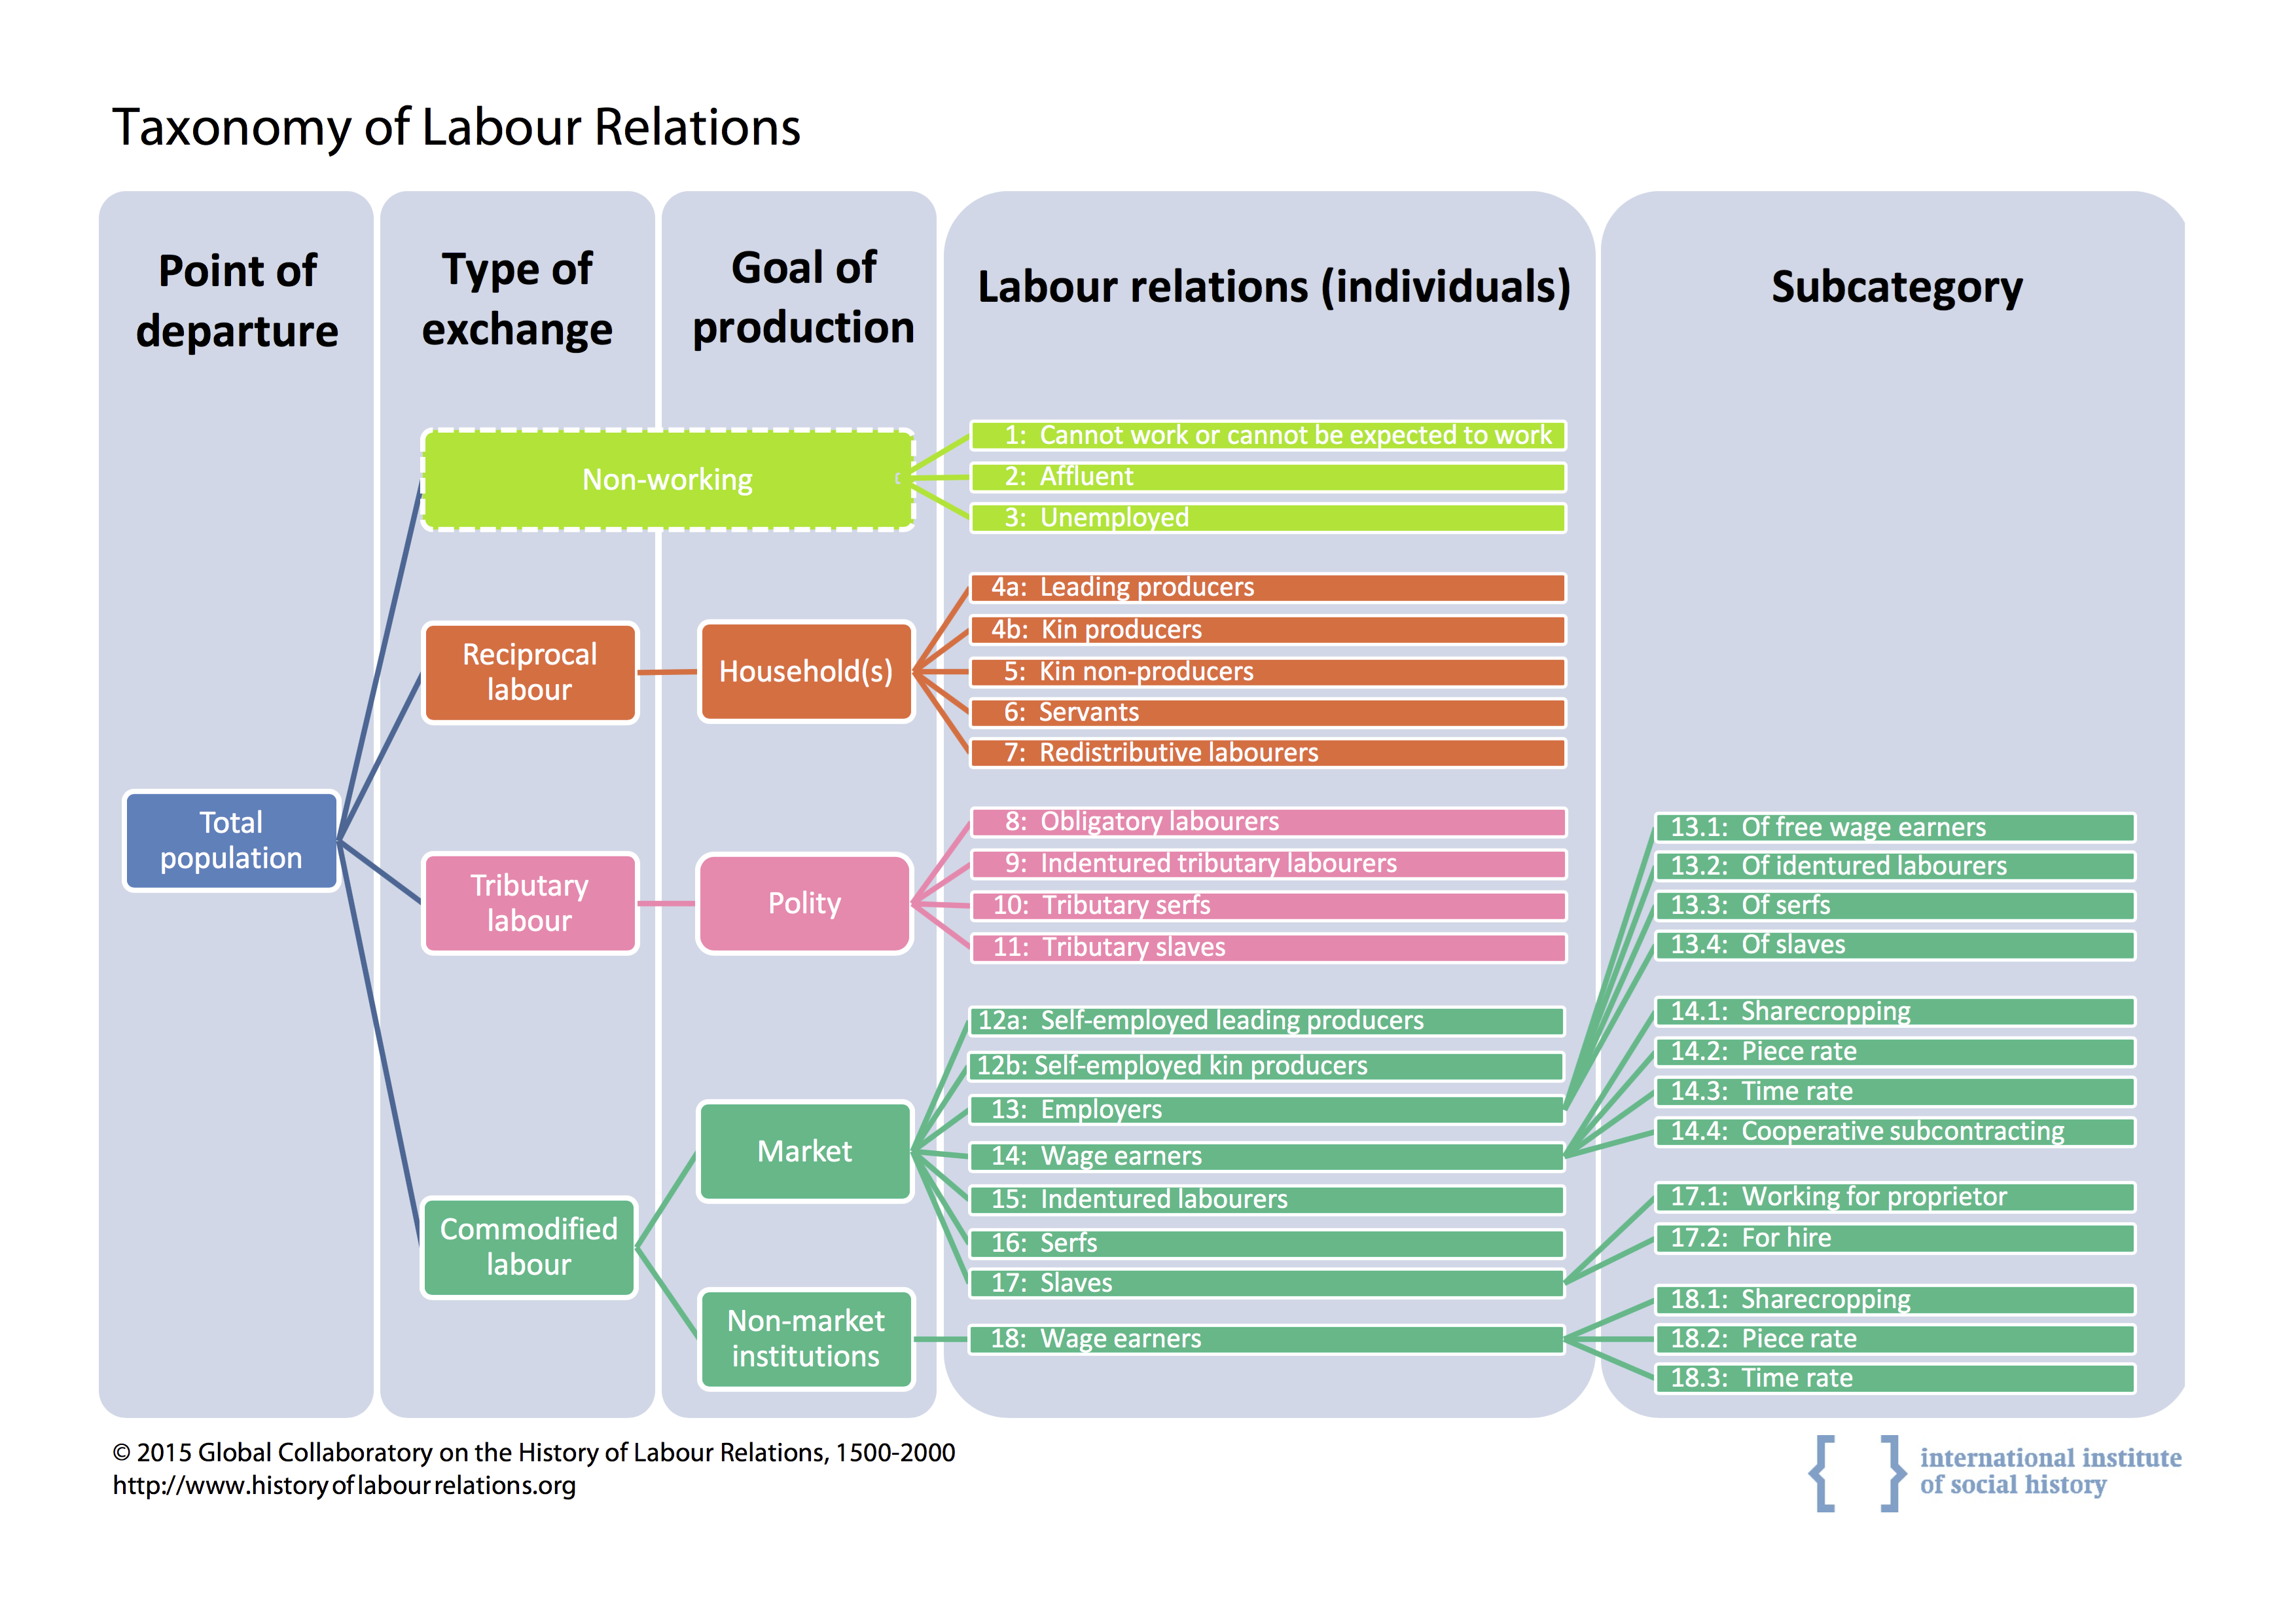 Figure 1. The taxonomy of labour relations, 2015